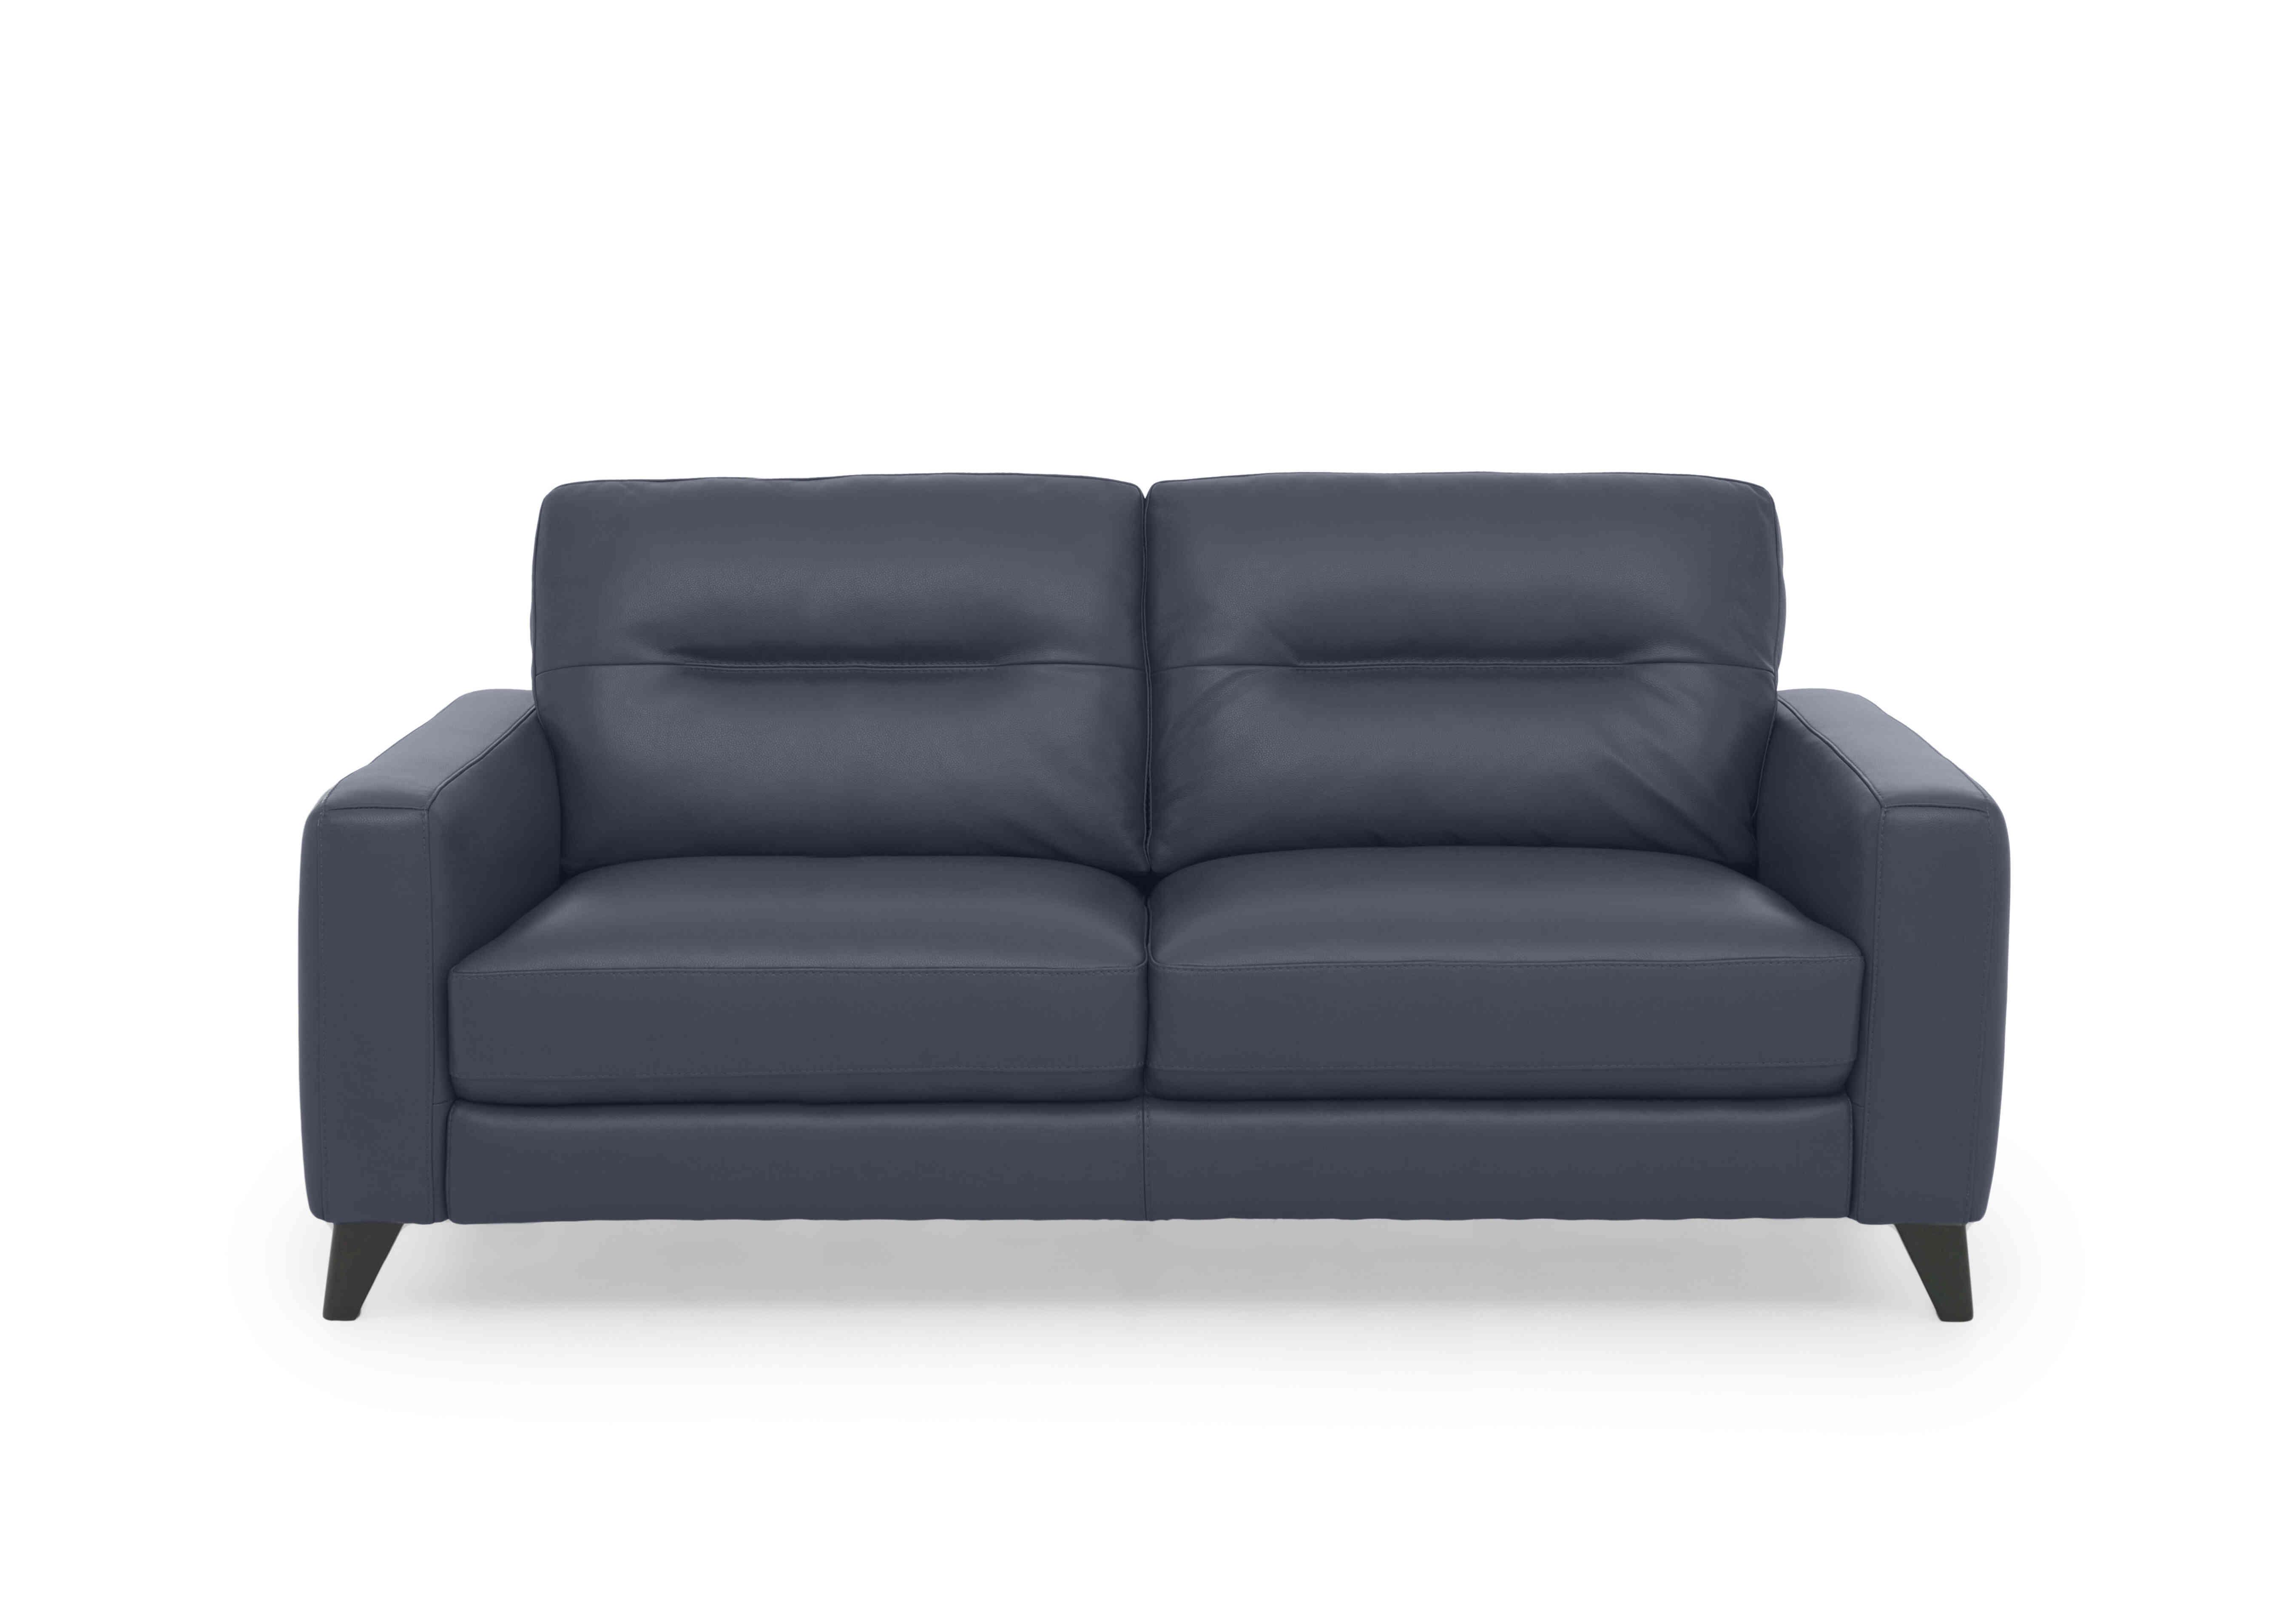 Jules 3 Seater Leather Sofa in Bv-313e Ocean Blue on Furniture Village